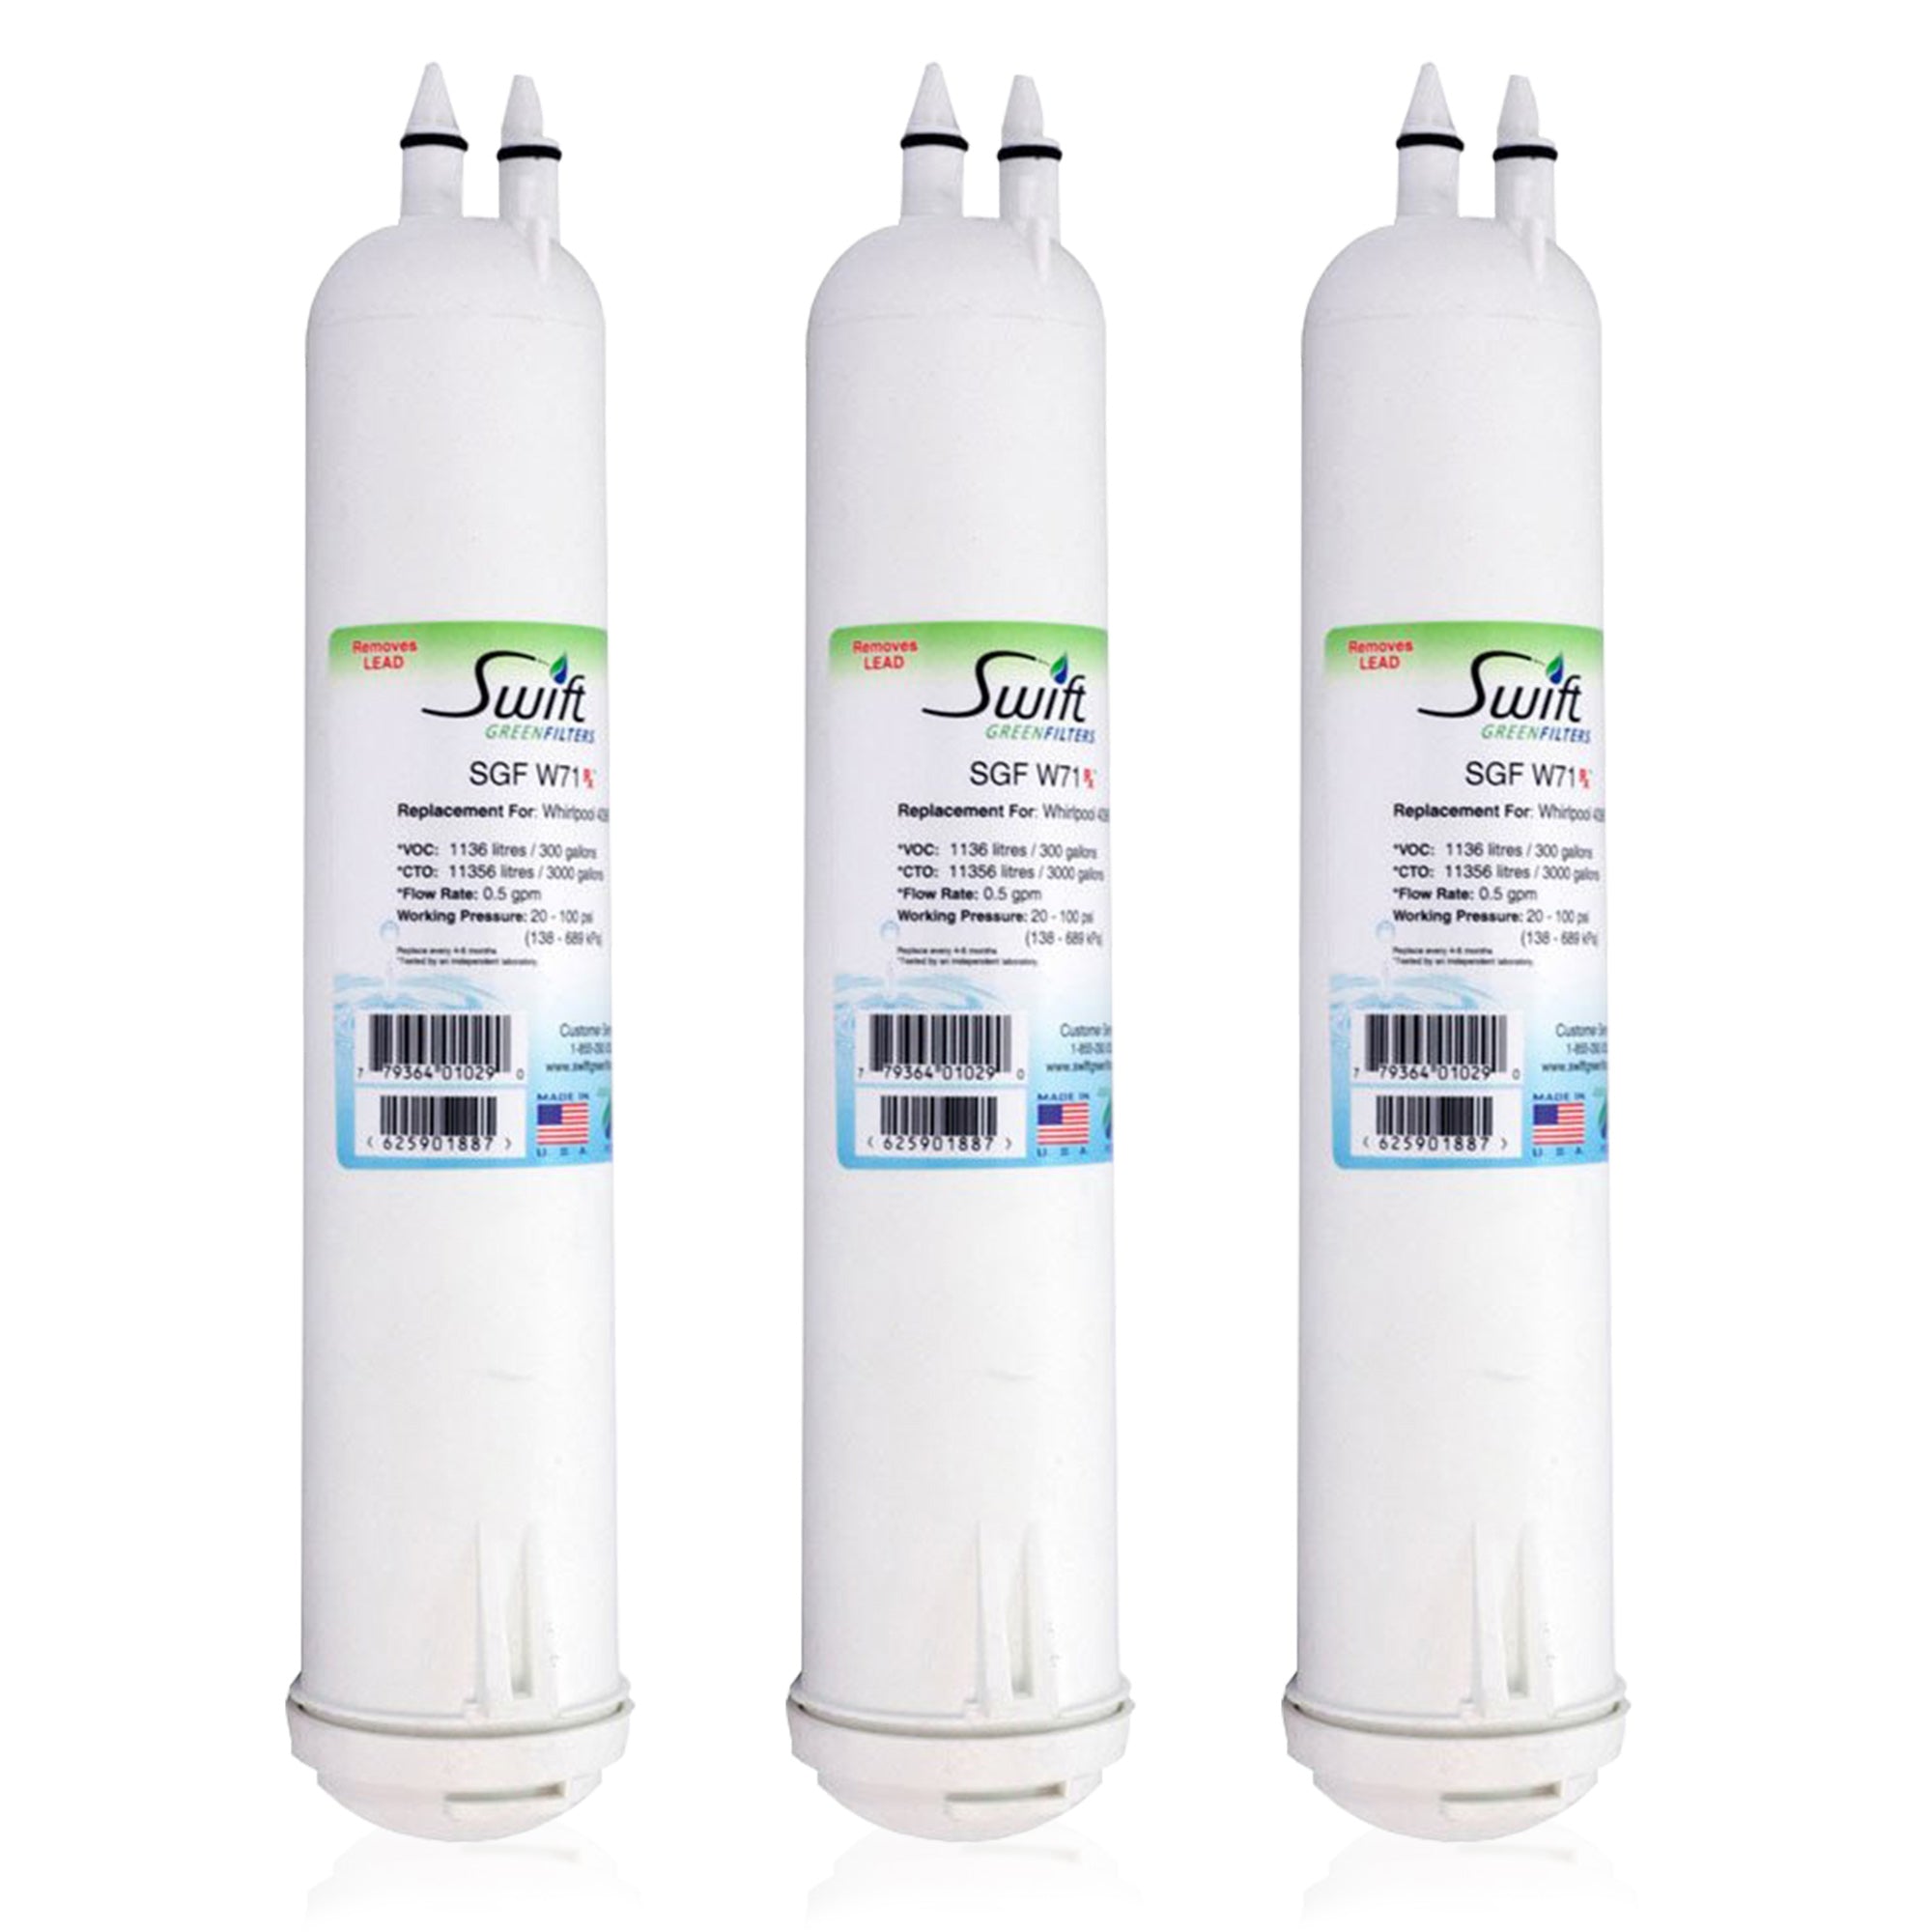 Whirlpool 4396841, 4396710,EDR3RXD1,EFF-6016A,EDR3RXD1,FILTER 3 Compatible Pharmaceuticals Refrigerator Water Filter (Authorized to sell only in Canada)